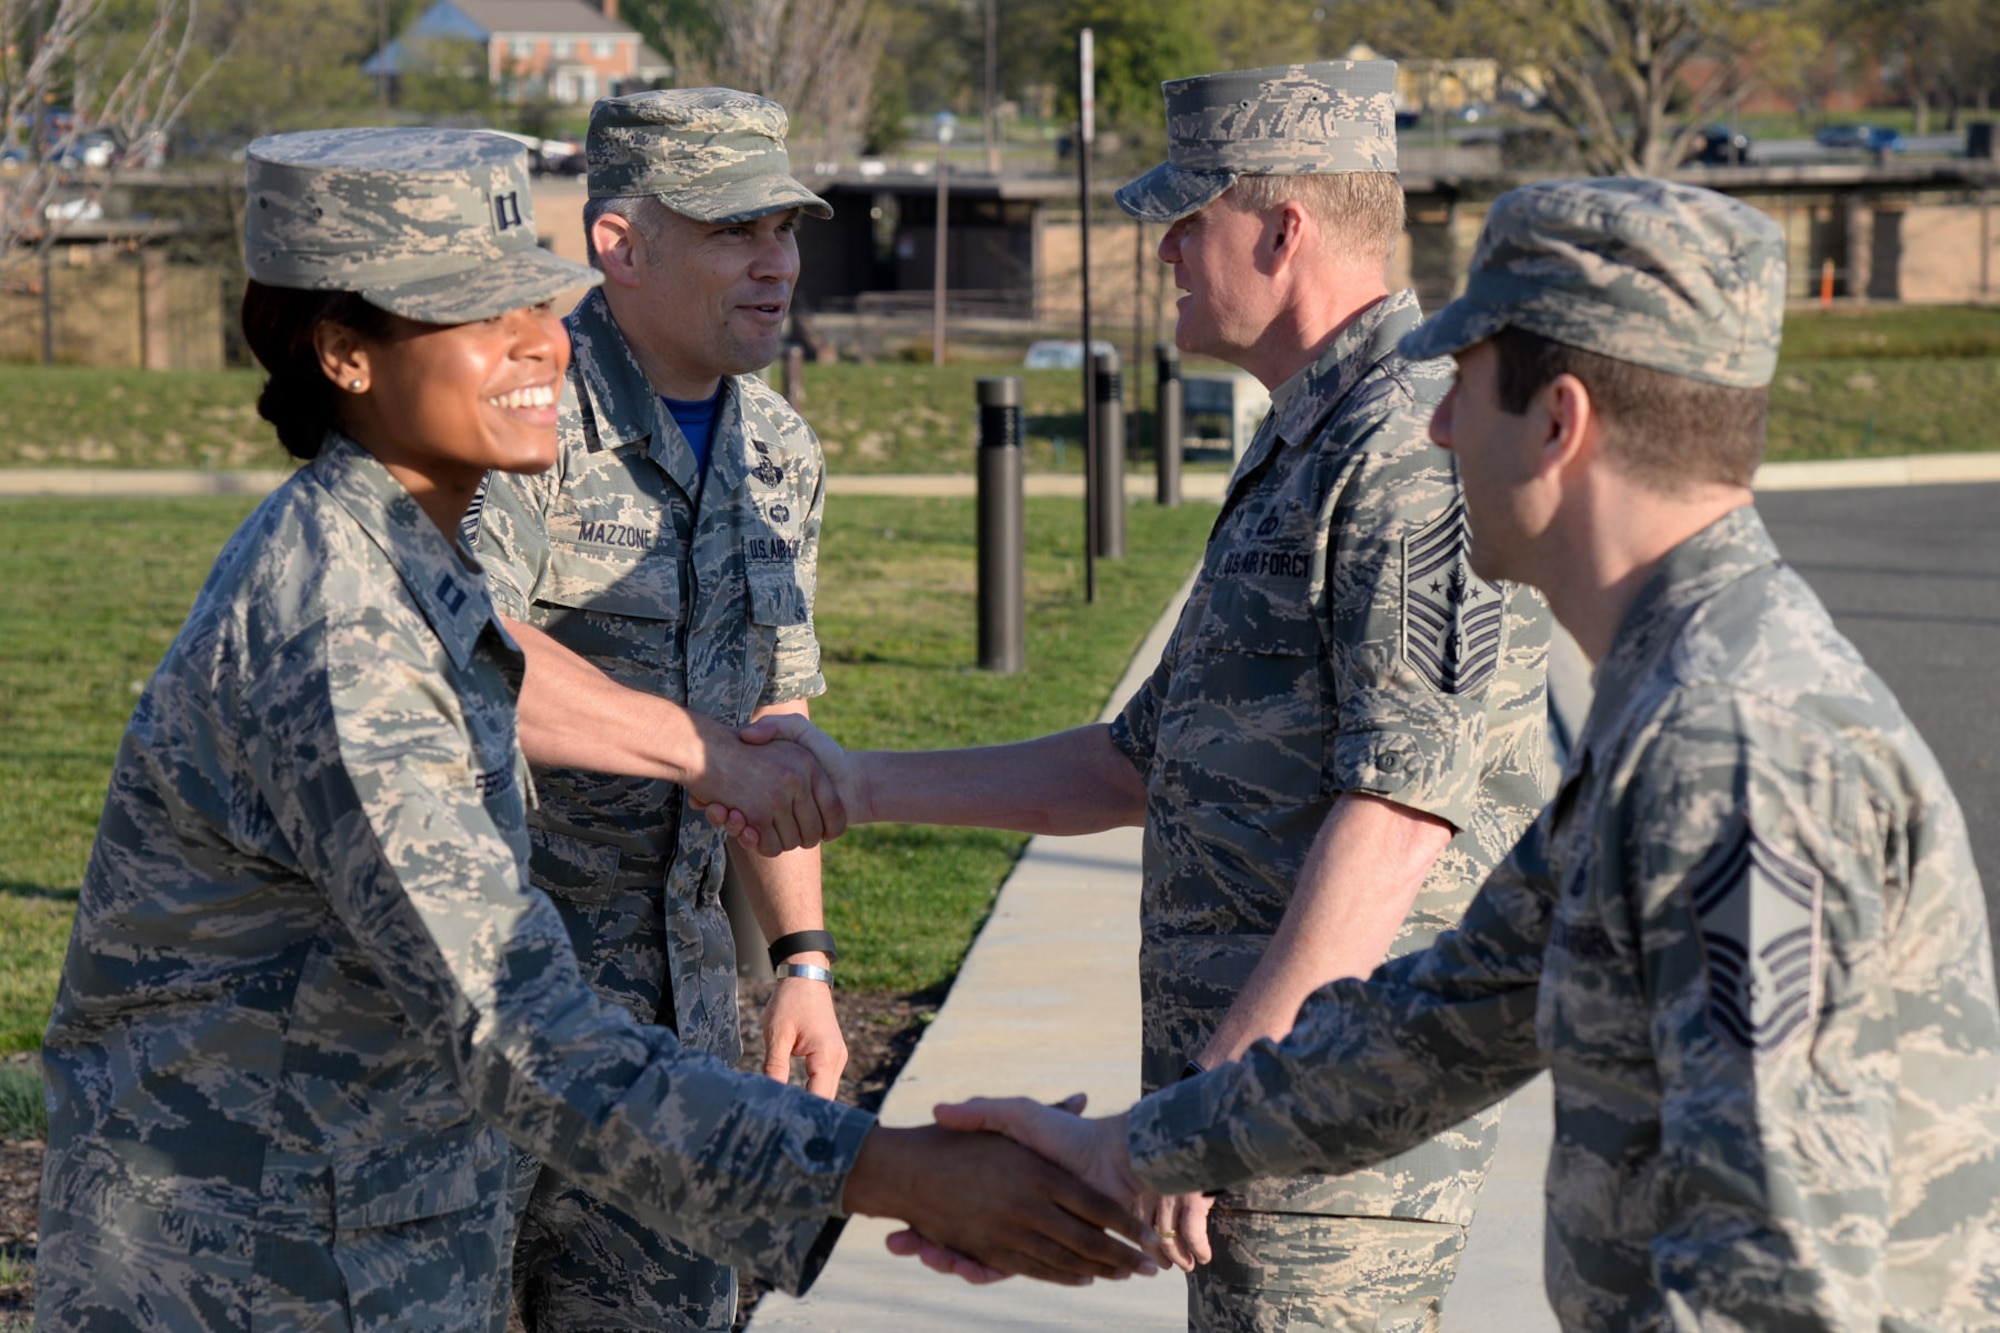 Air Force District of Washington Command Chief Master Sgt. Tommy Mazzone greets Chief Master Sergeant of the Air Force James Cody during the National Capital region Joint-Service Junior Officer Leadership Summit held at the General Jacob E. Smart Conference Center on Joint Base Andrews, Md., April 15, 2016. The course is designed to develop joint service junior officers by exchanging ideas with their peers and through mentoring by senior military leadership. (U.S. Air Force photo/Tech. Sgt. Matt Davis)